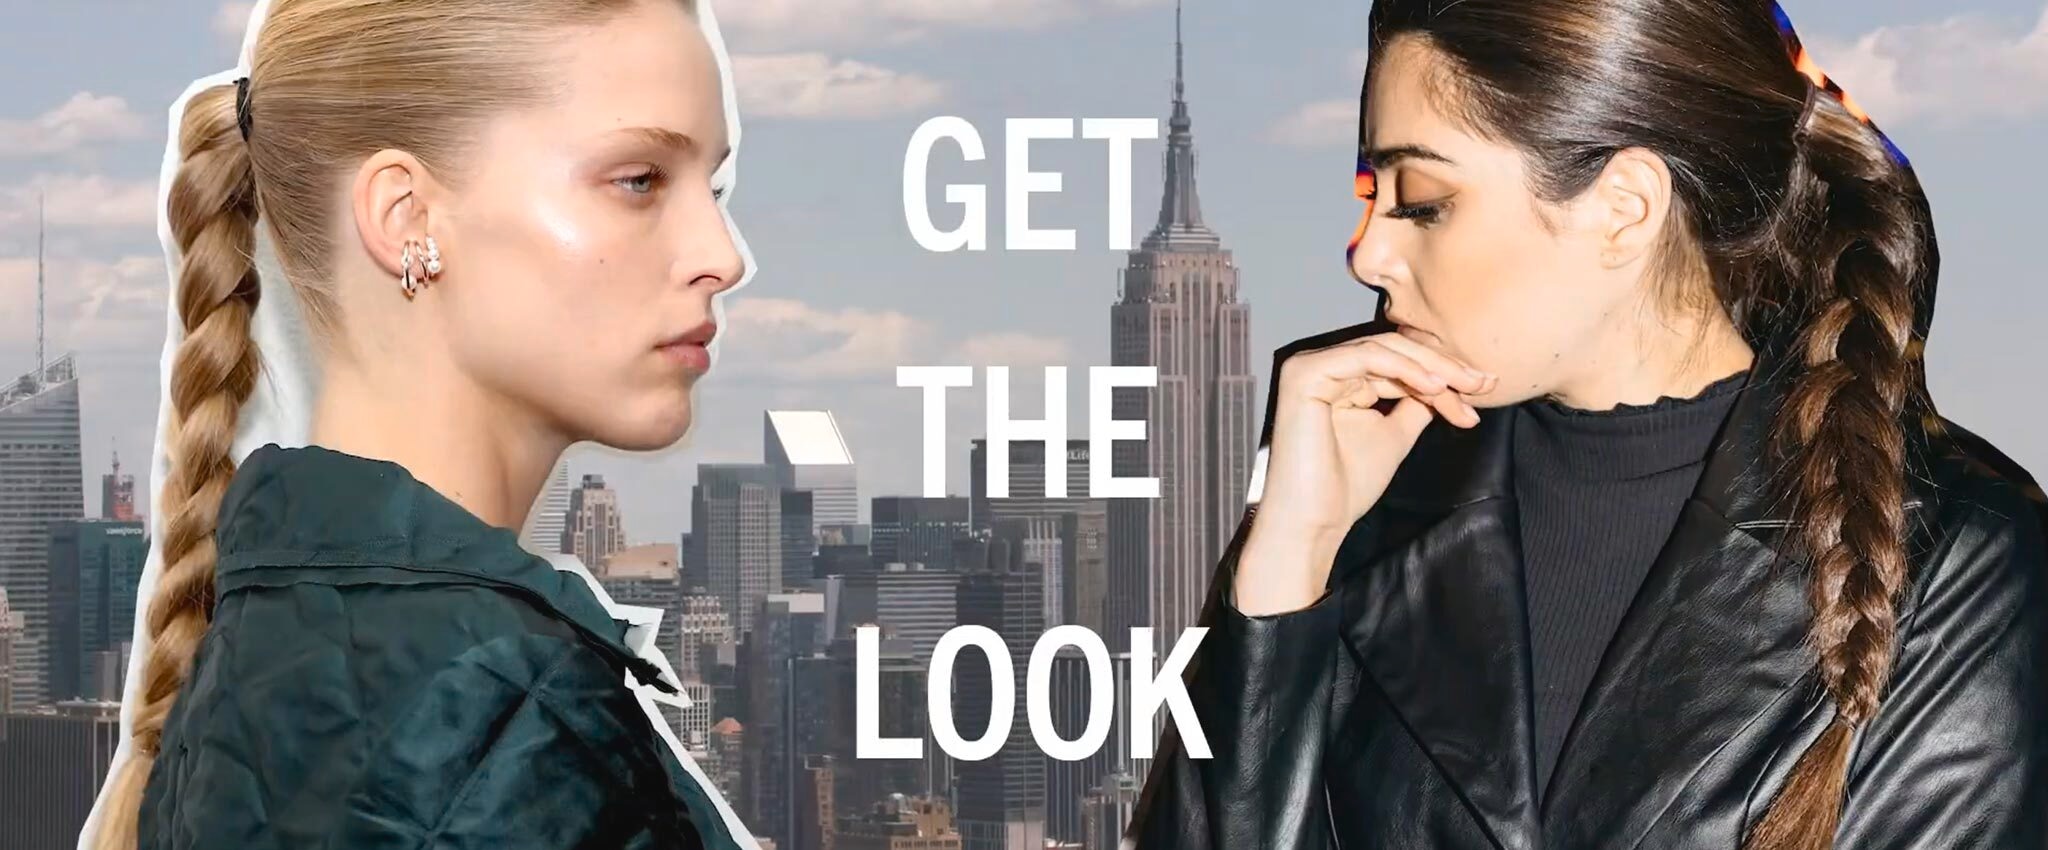 Get The Look #3 - Jason Wu with Gabrielle Roccuzzo